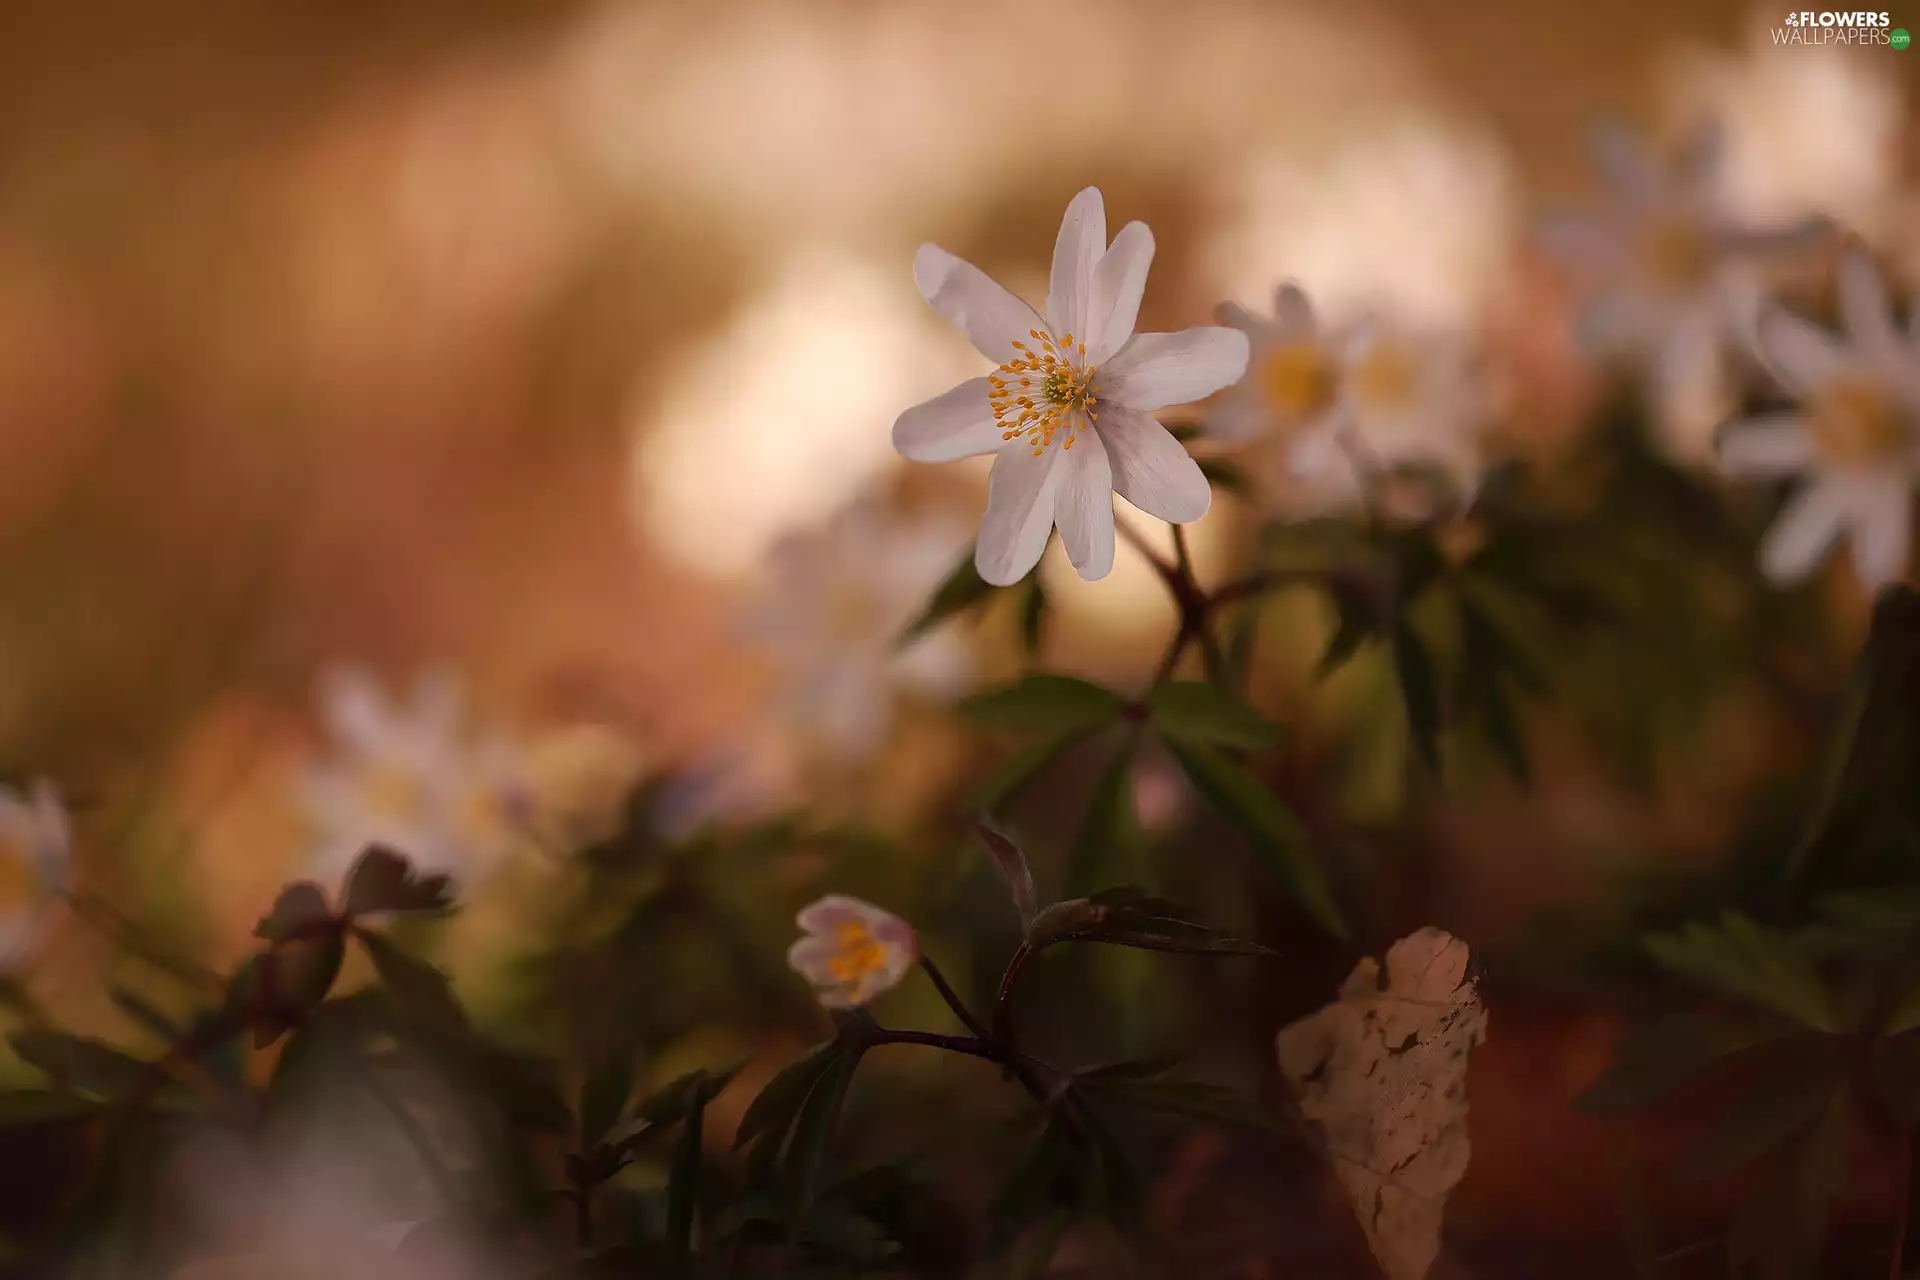 Wood Anemone, Colourfull Flowers, blurry background, White